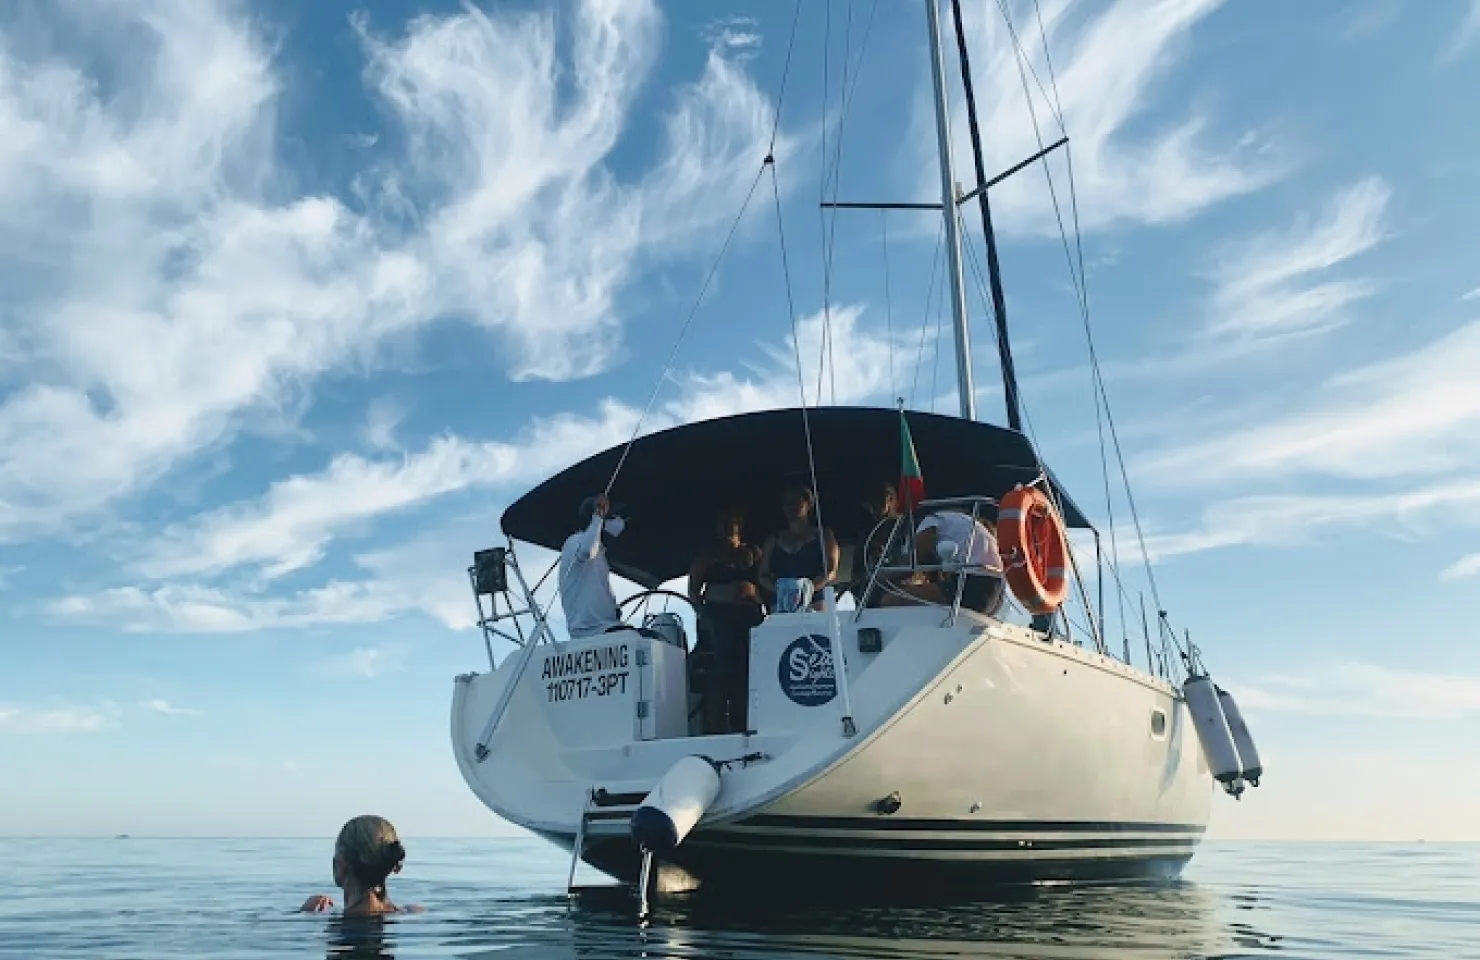 Sailing Trips and Charters - Algarve Yacht Cruise